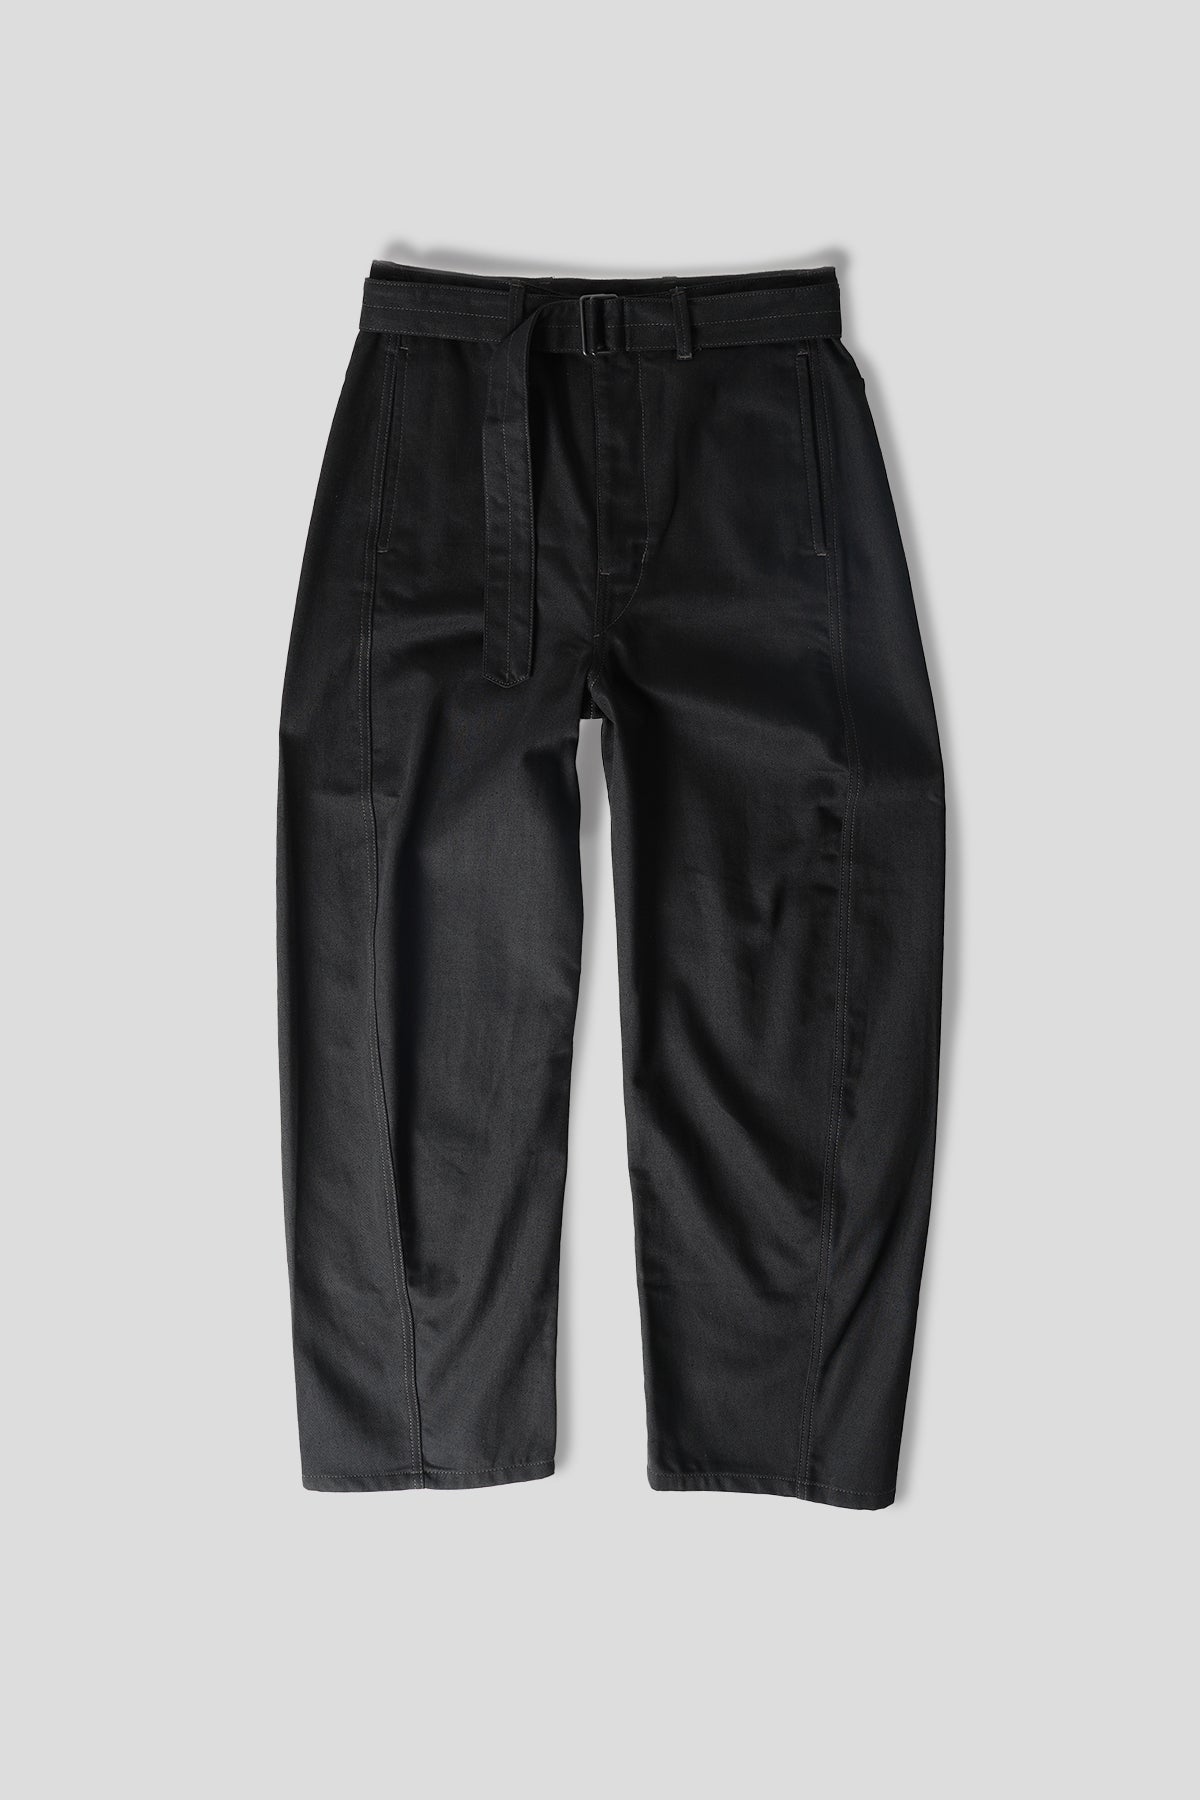 LEMAIRE - BLACK TWISTED BELTED TROUSERS - LE LABO STORE